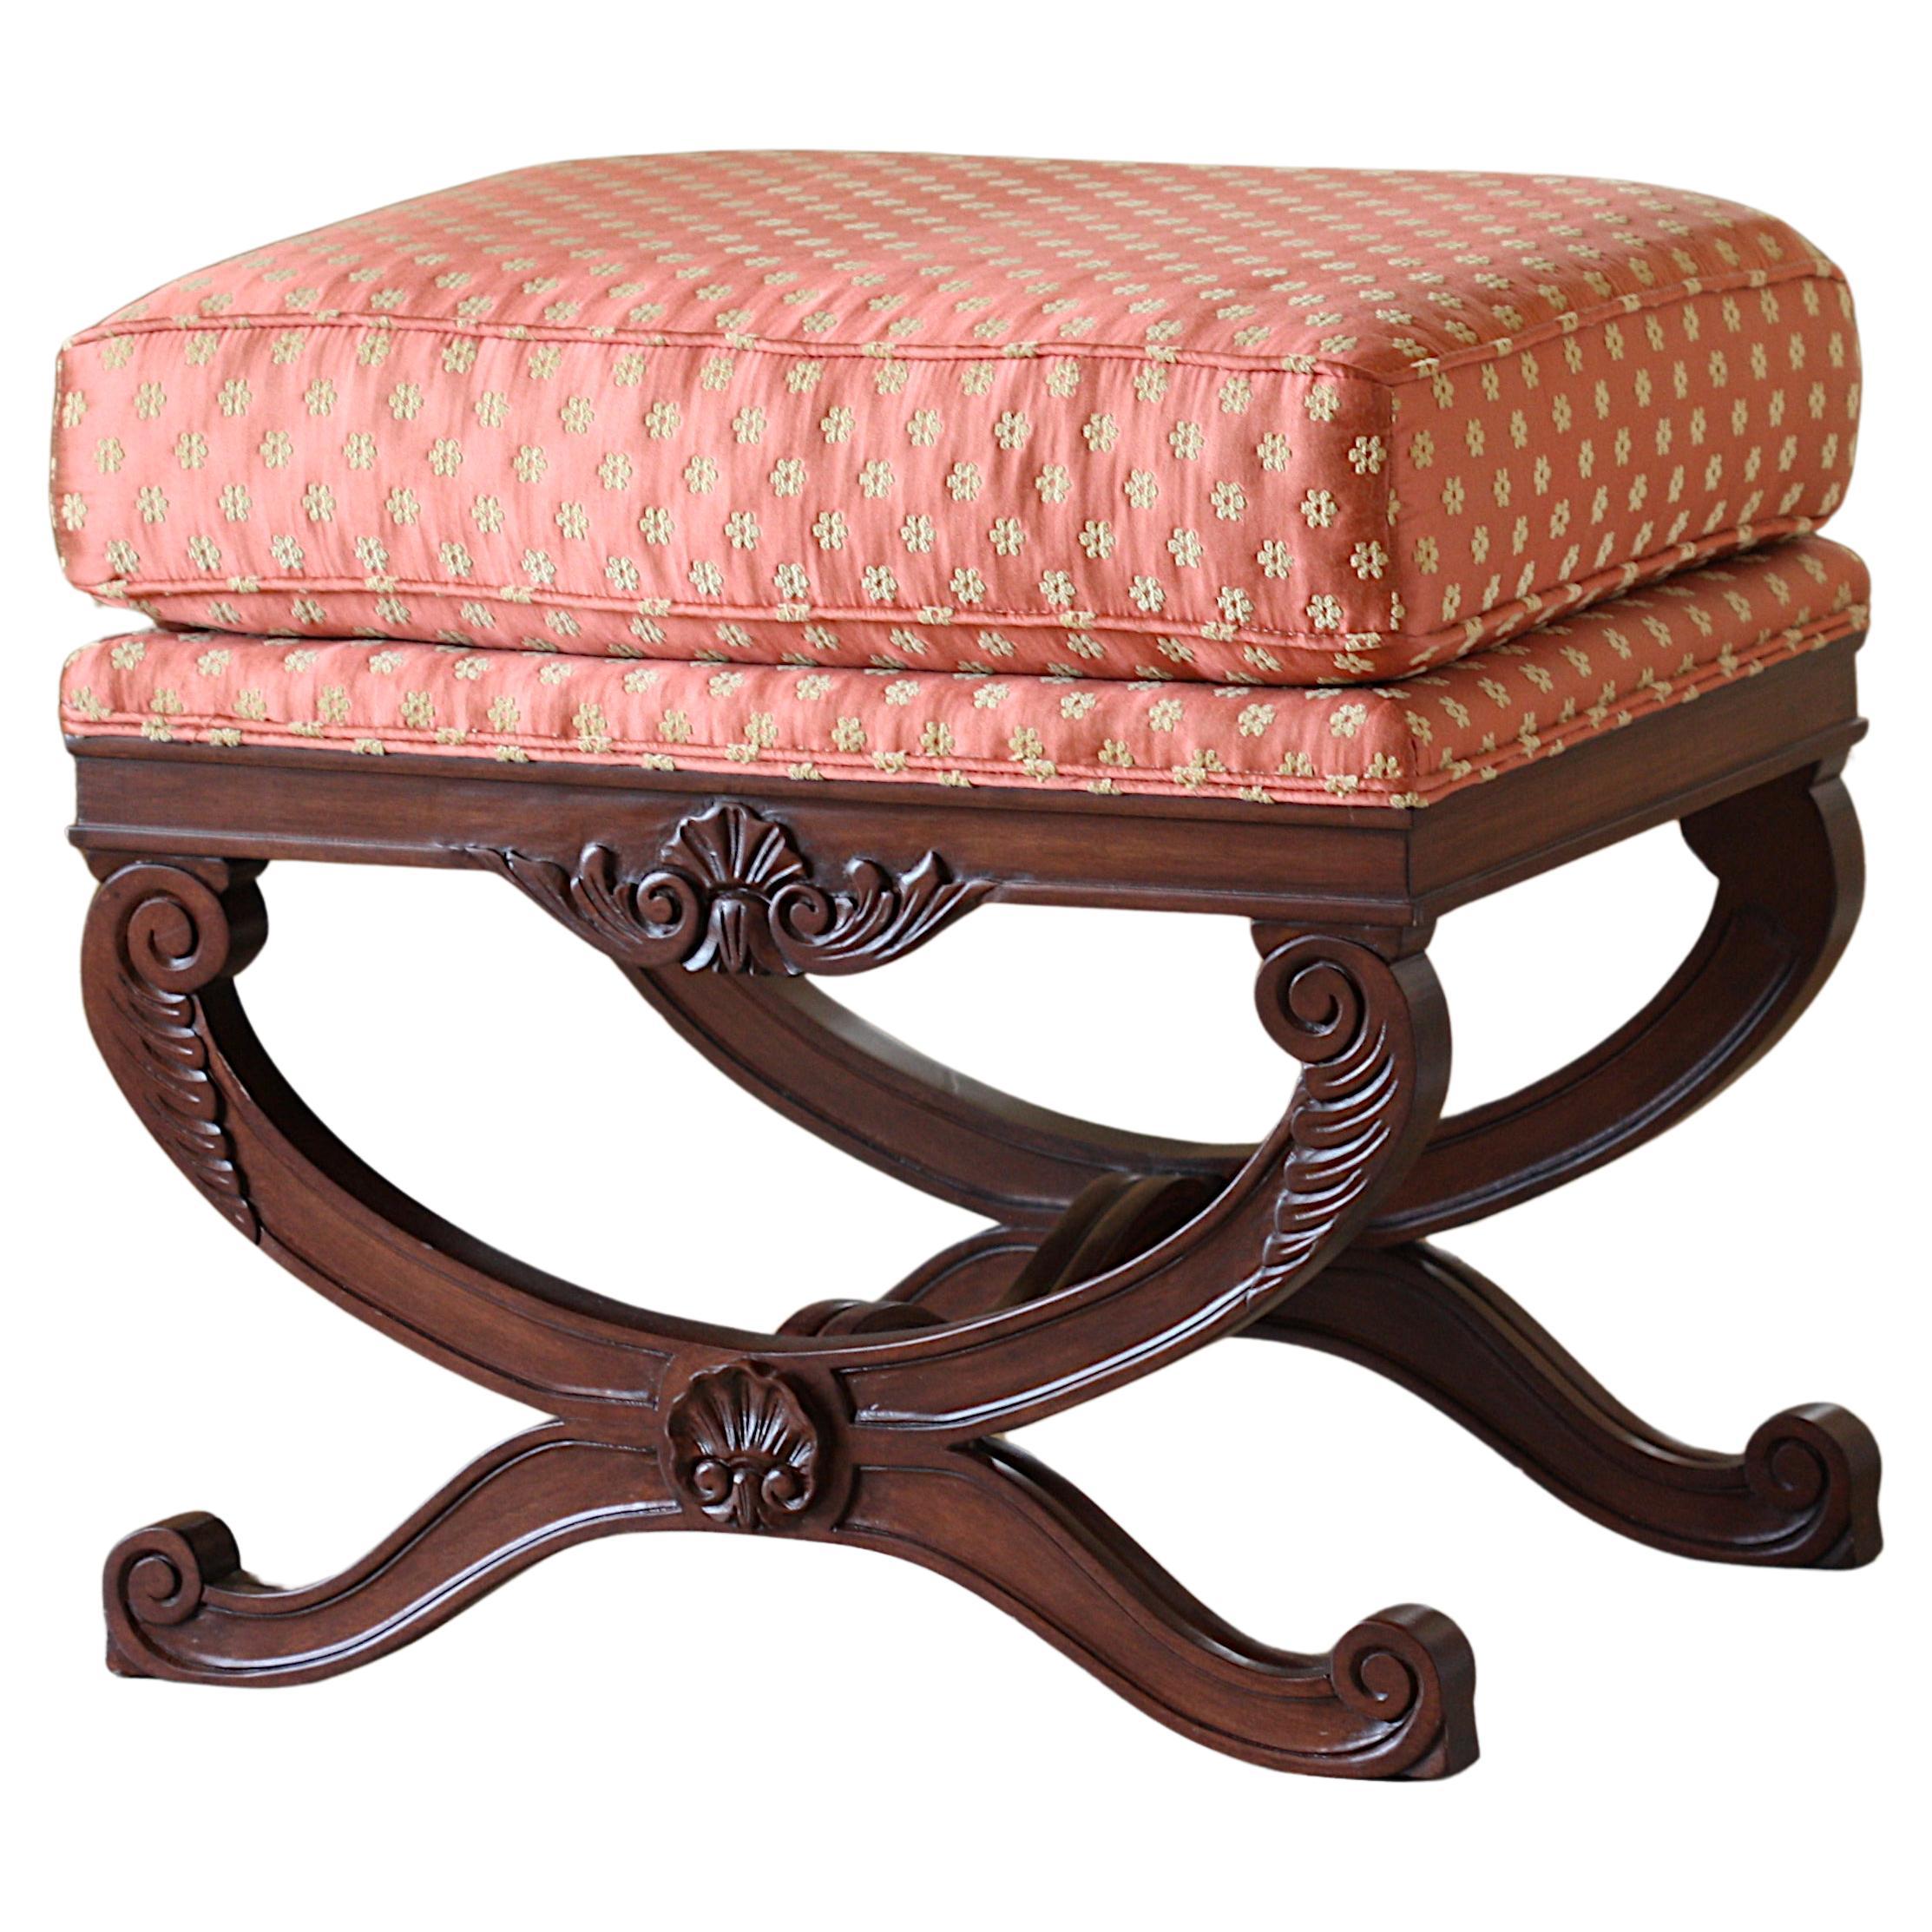  Regency Stained Wood Curule Stool  For Sale